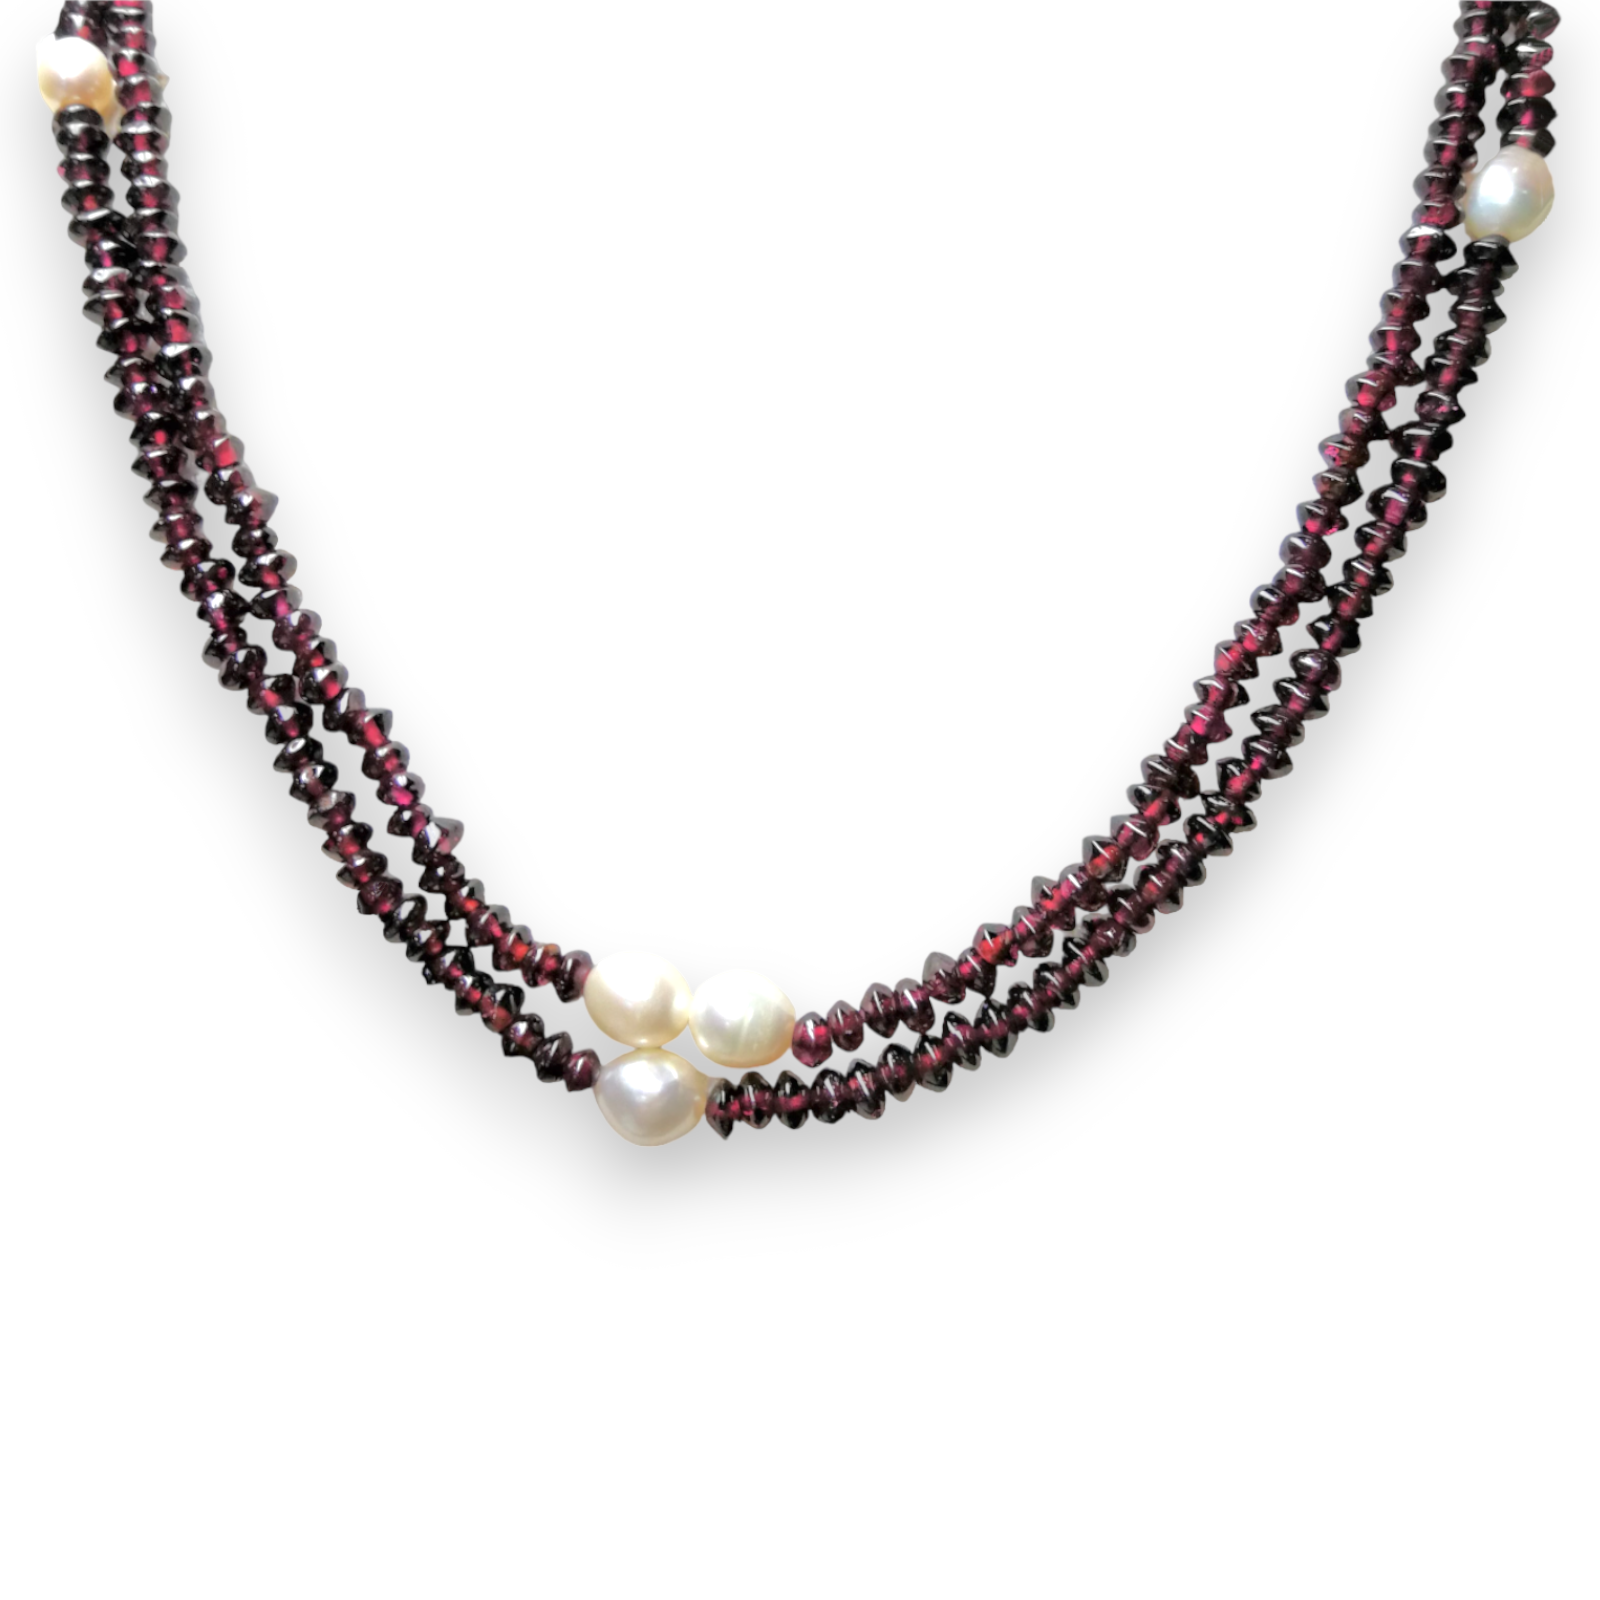 Natural Handmade Necklace 16"-18" Faceted Garnet Pearls Gemstone Beads Jewellery